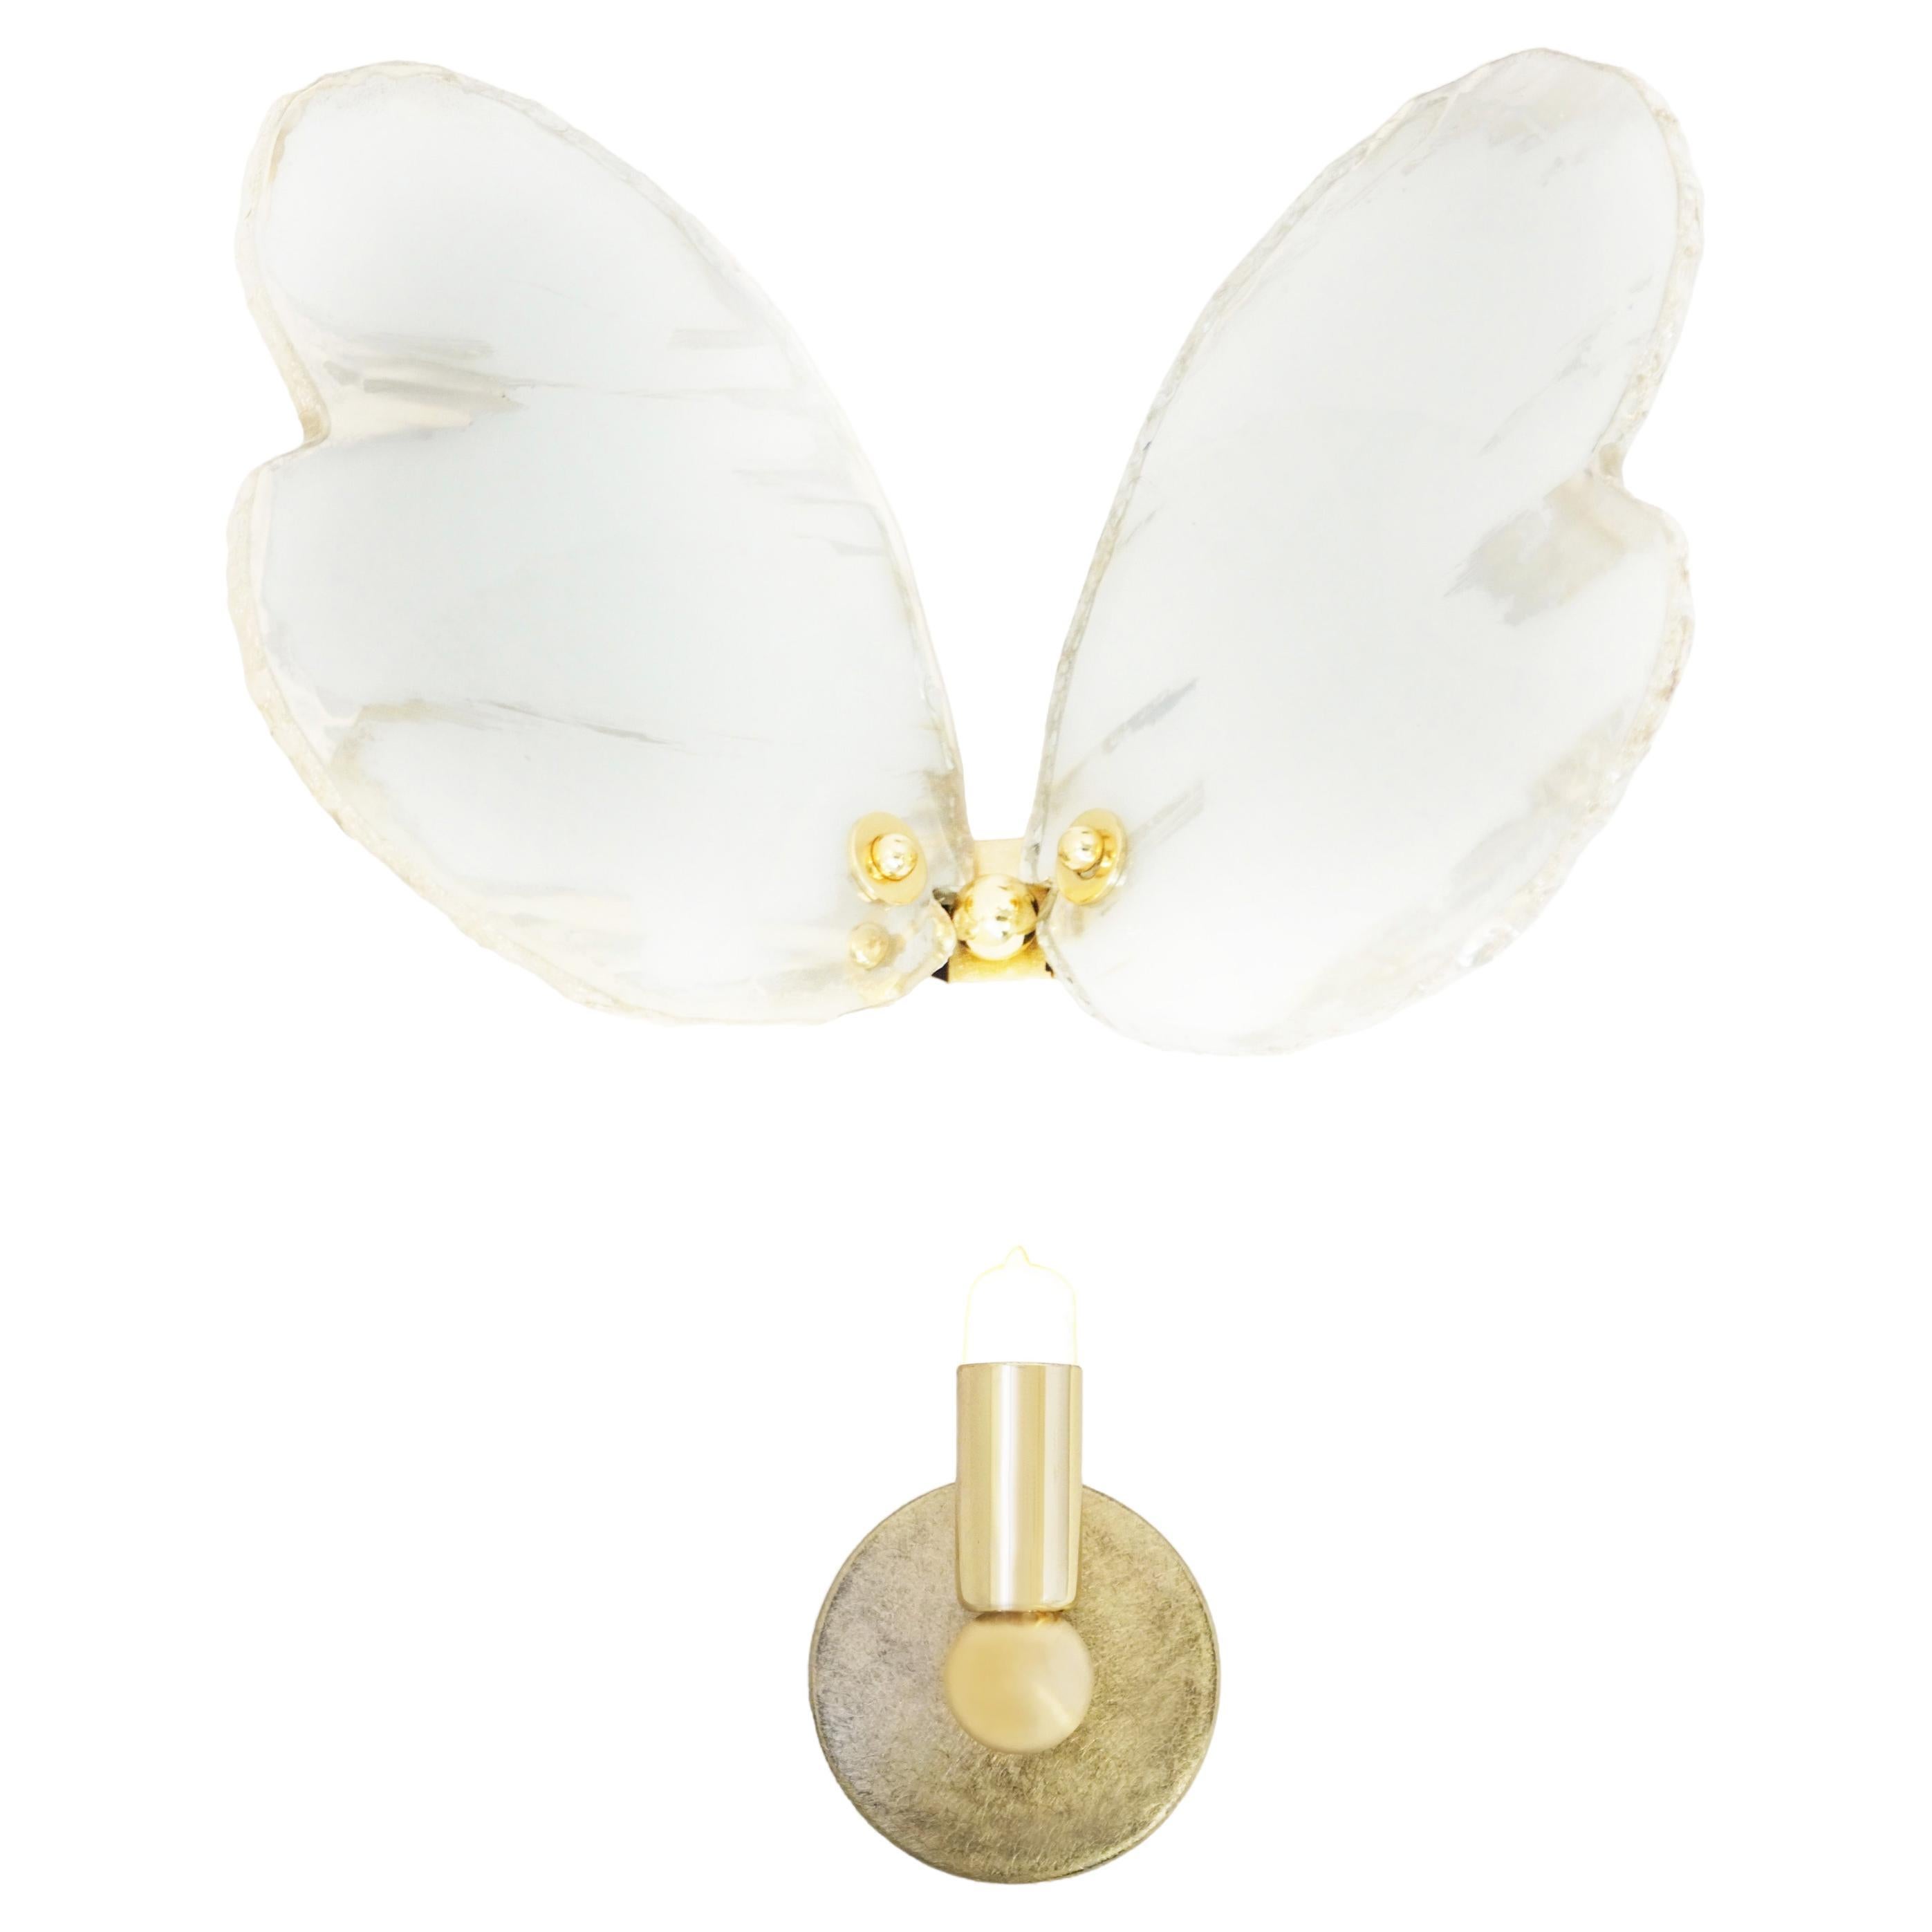  Butterfly Contemporary Wall light sculpture , art Silvered Glass white color   For Sale